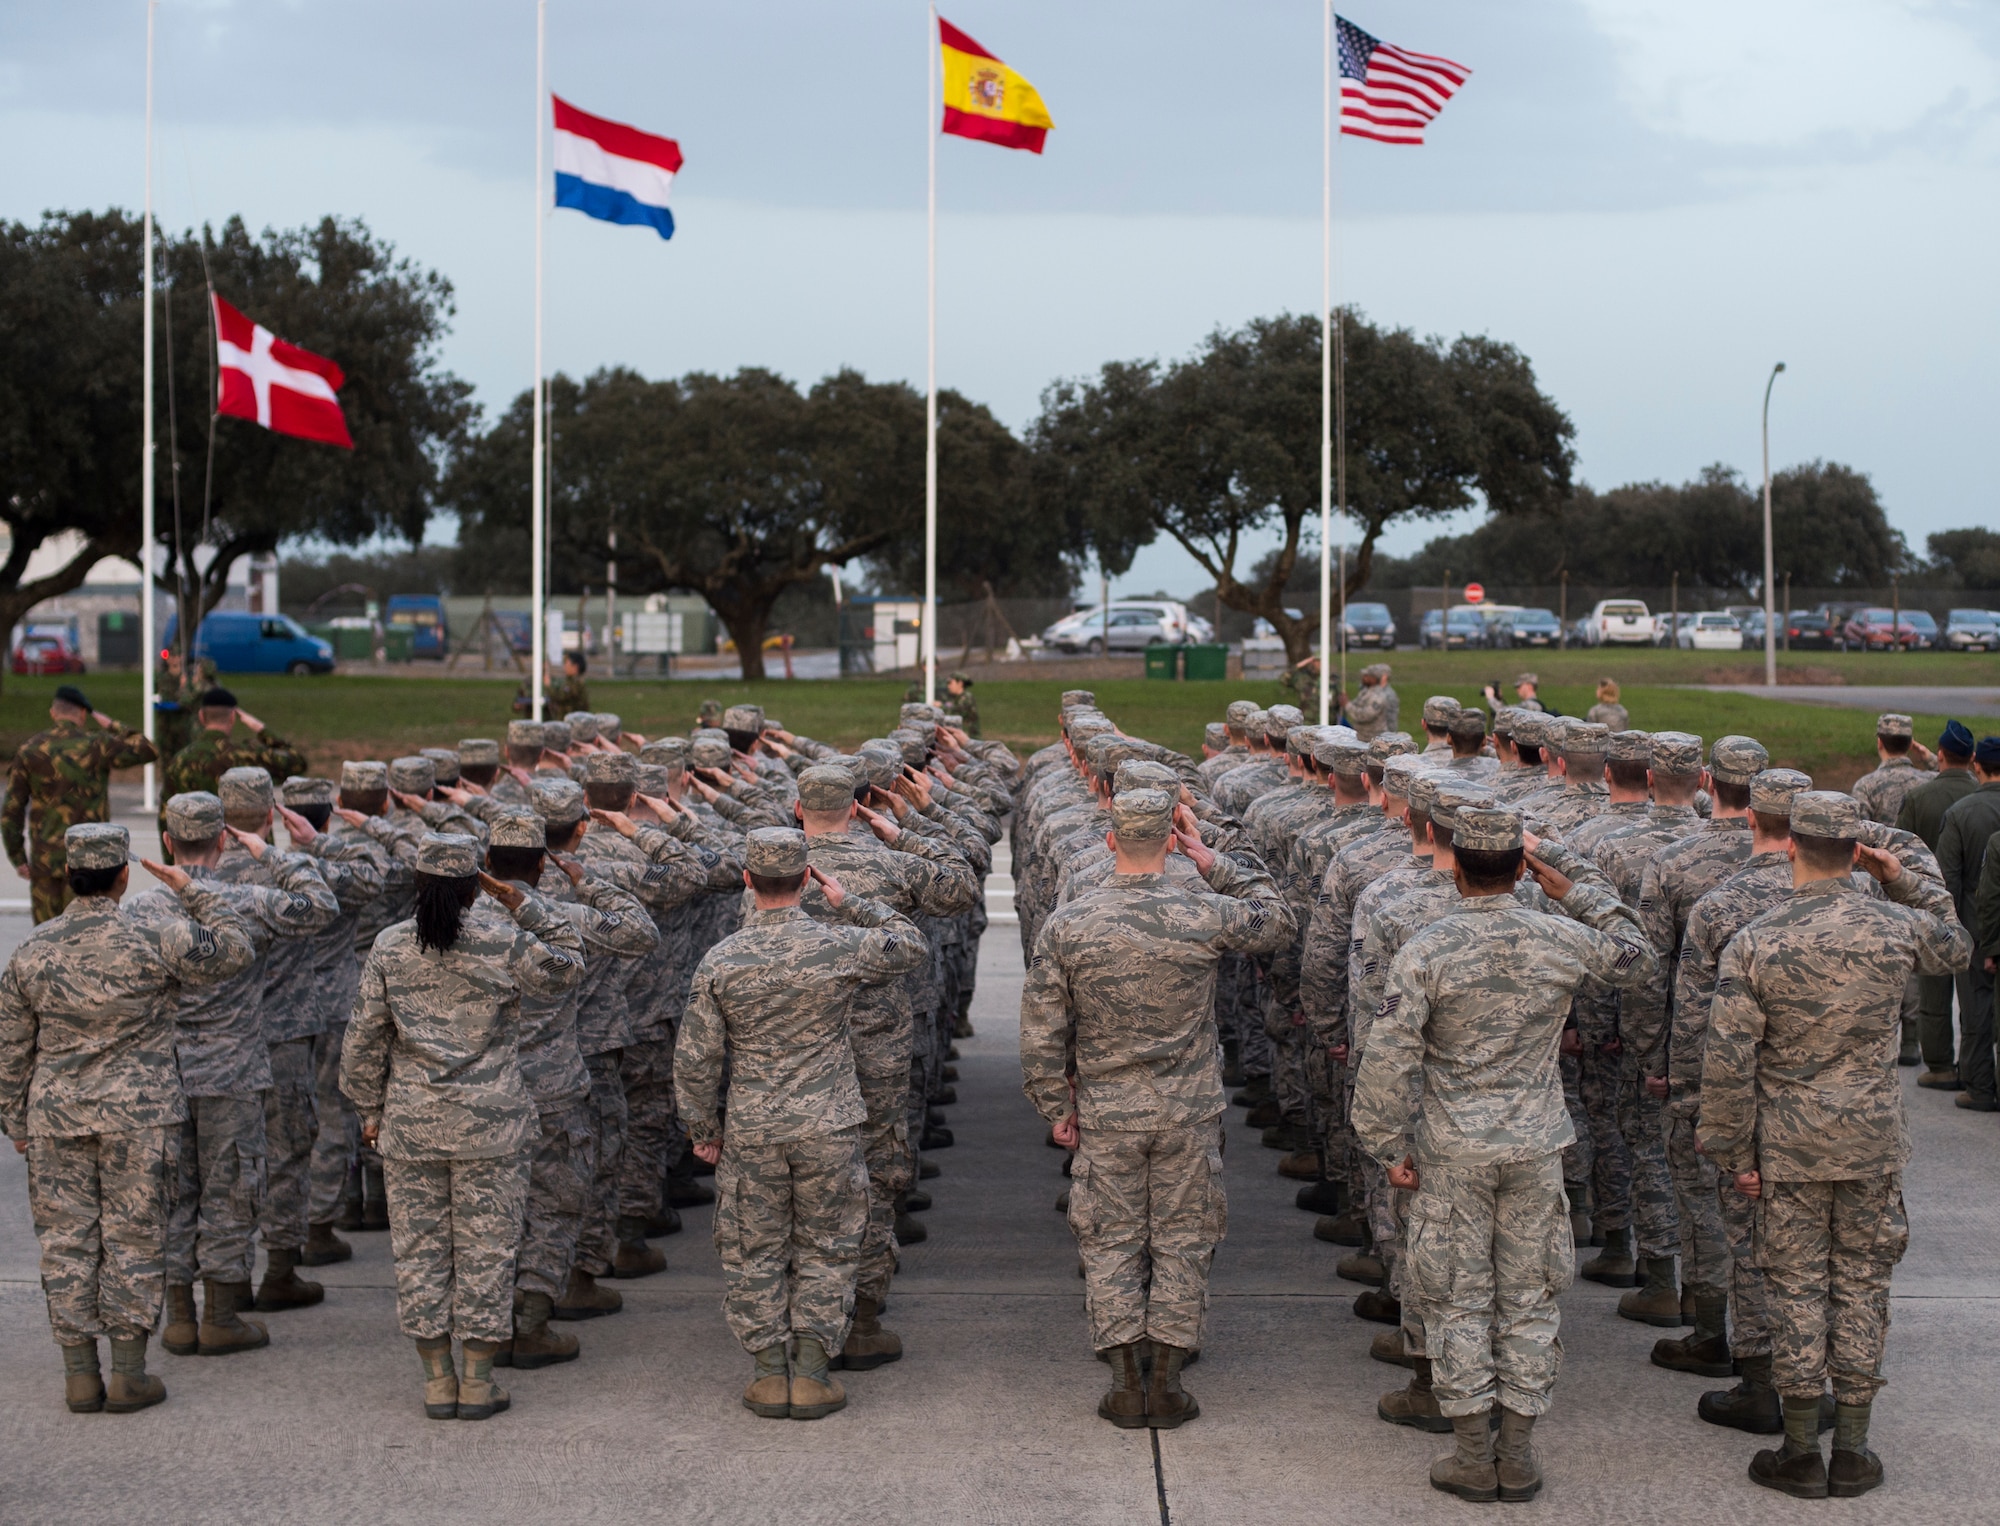 U.S. Airmen along with their international counterparts salute during the opening ceremony of exercise Real Thaw 16 in Beja, Portugal, Feb. 21, 2016. Real Thaw 16 is a Portuguese- hosted NATO exercise that provides tactical training to multiple participating nations. Its aim is to merge and employ different aerial platforms towards one major objective, covering a vast range of activities to include Defensive and Offensive Counter Air Operations, High Value Air Assets Protection and a Slow Mover Protection. Approximately 3,500 service members throughout Europe and the U.S. are participating in the event. (U.S. Air Force photo/Senior Airman Jonathan Stefanko)